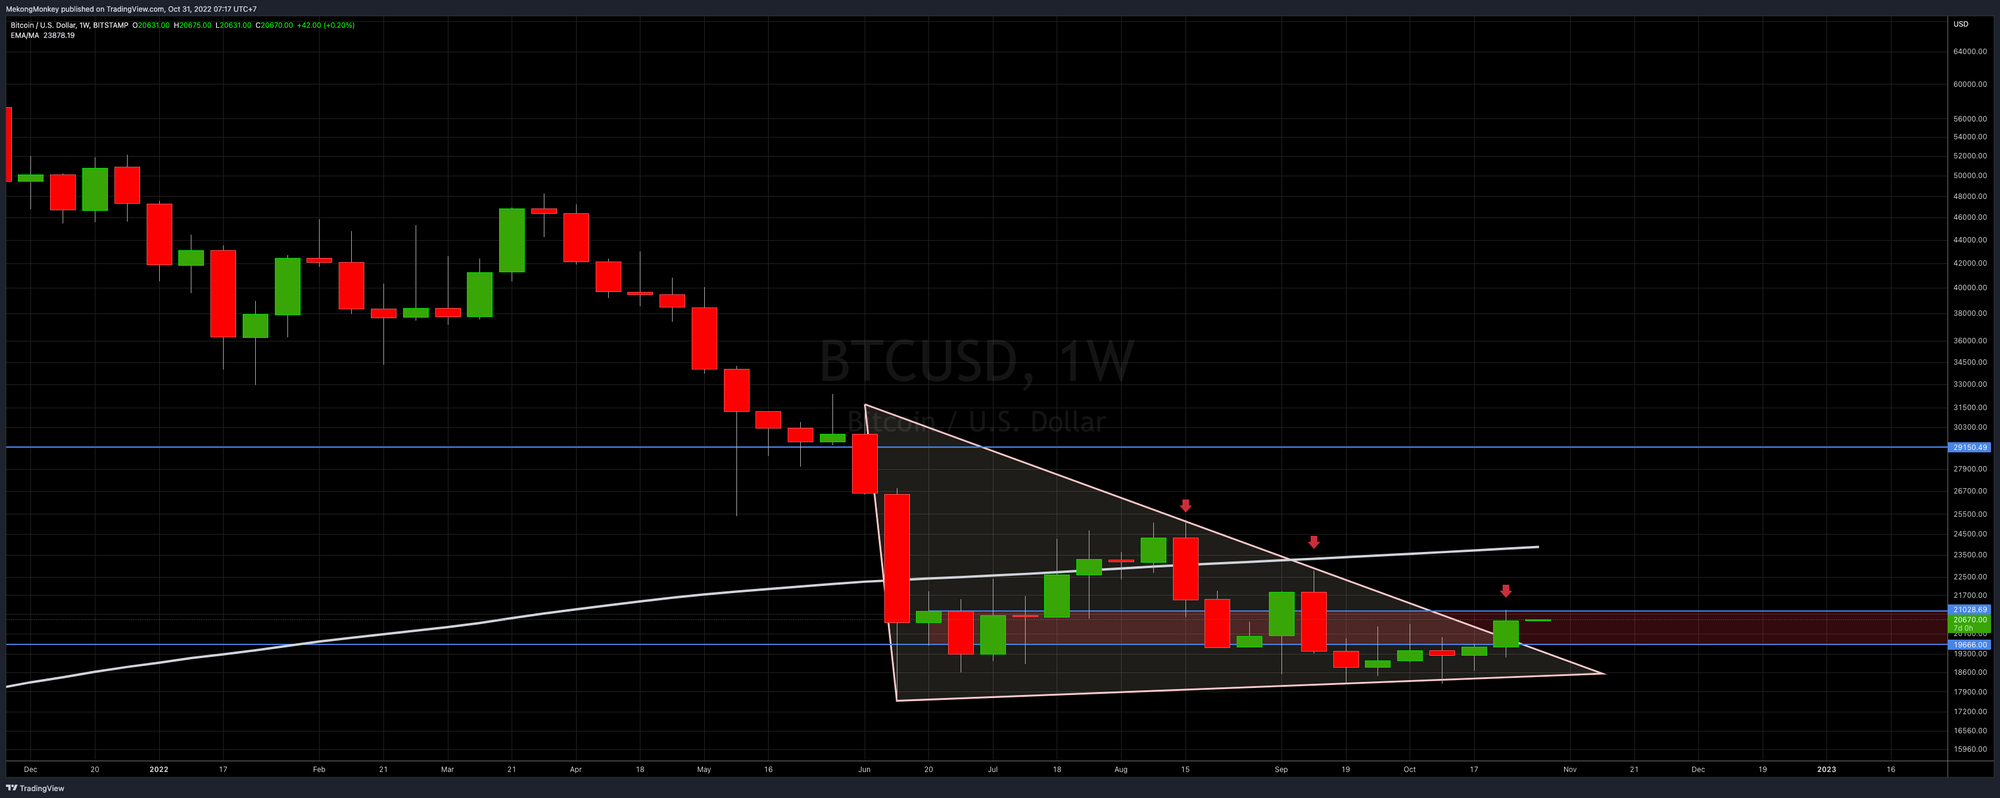 BTCUSD, no bull party just yet